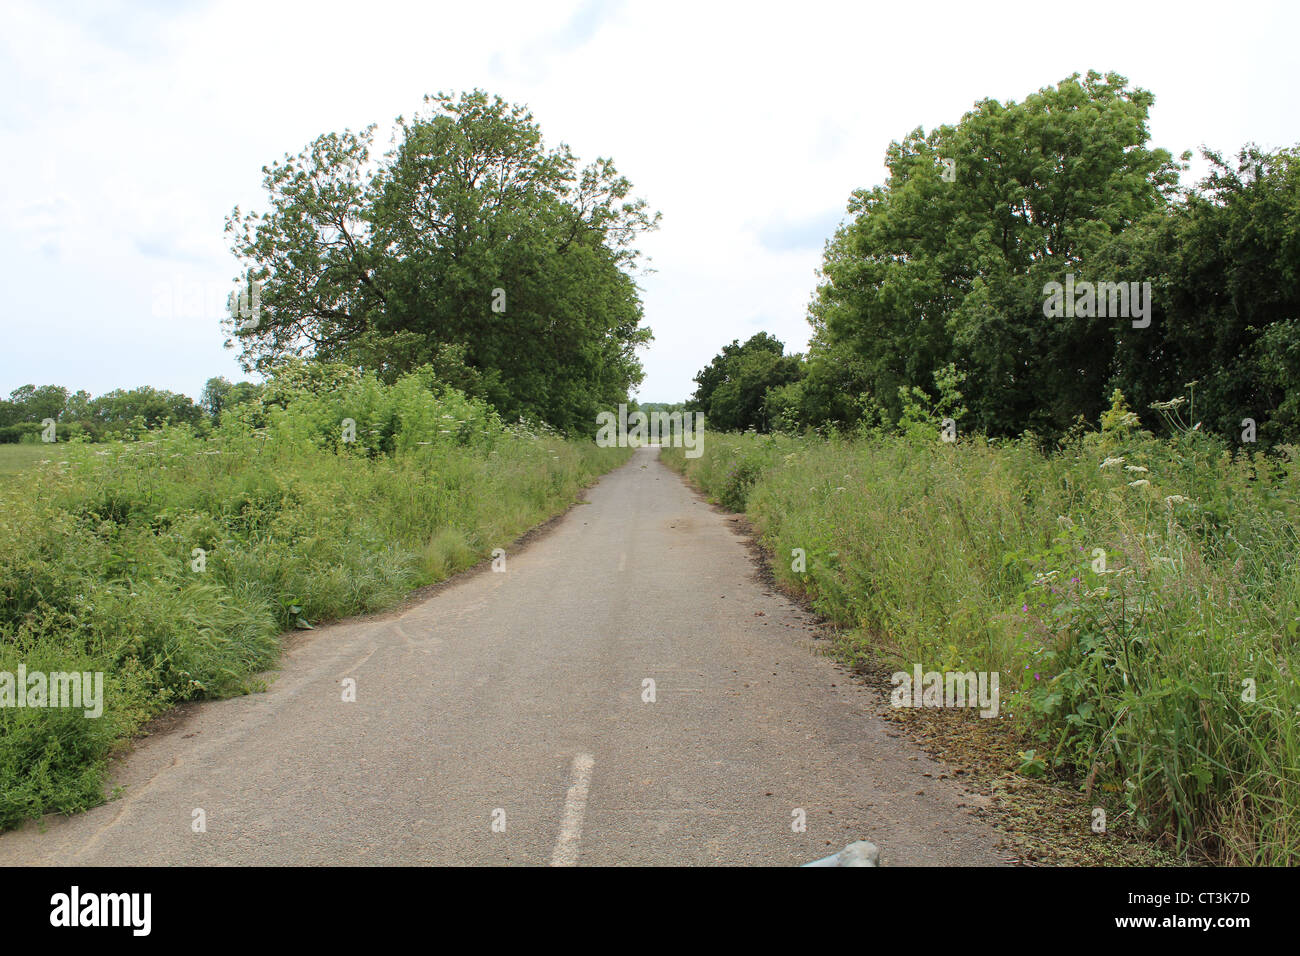 On the road to nowhere (an old abandoned lane). Stock Photo